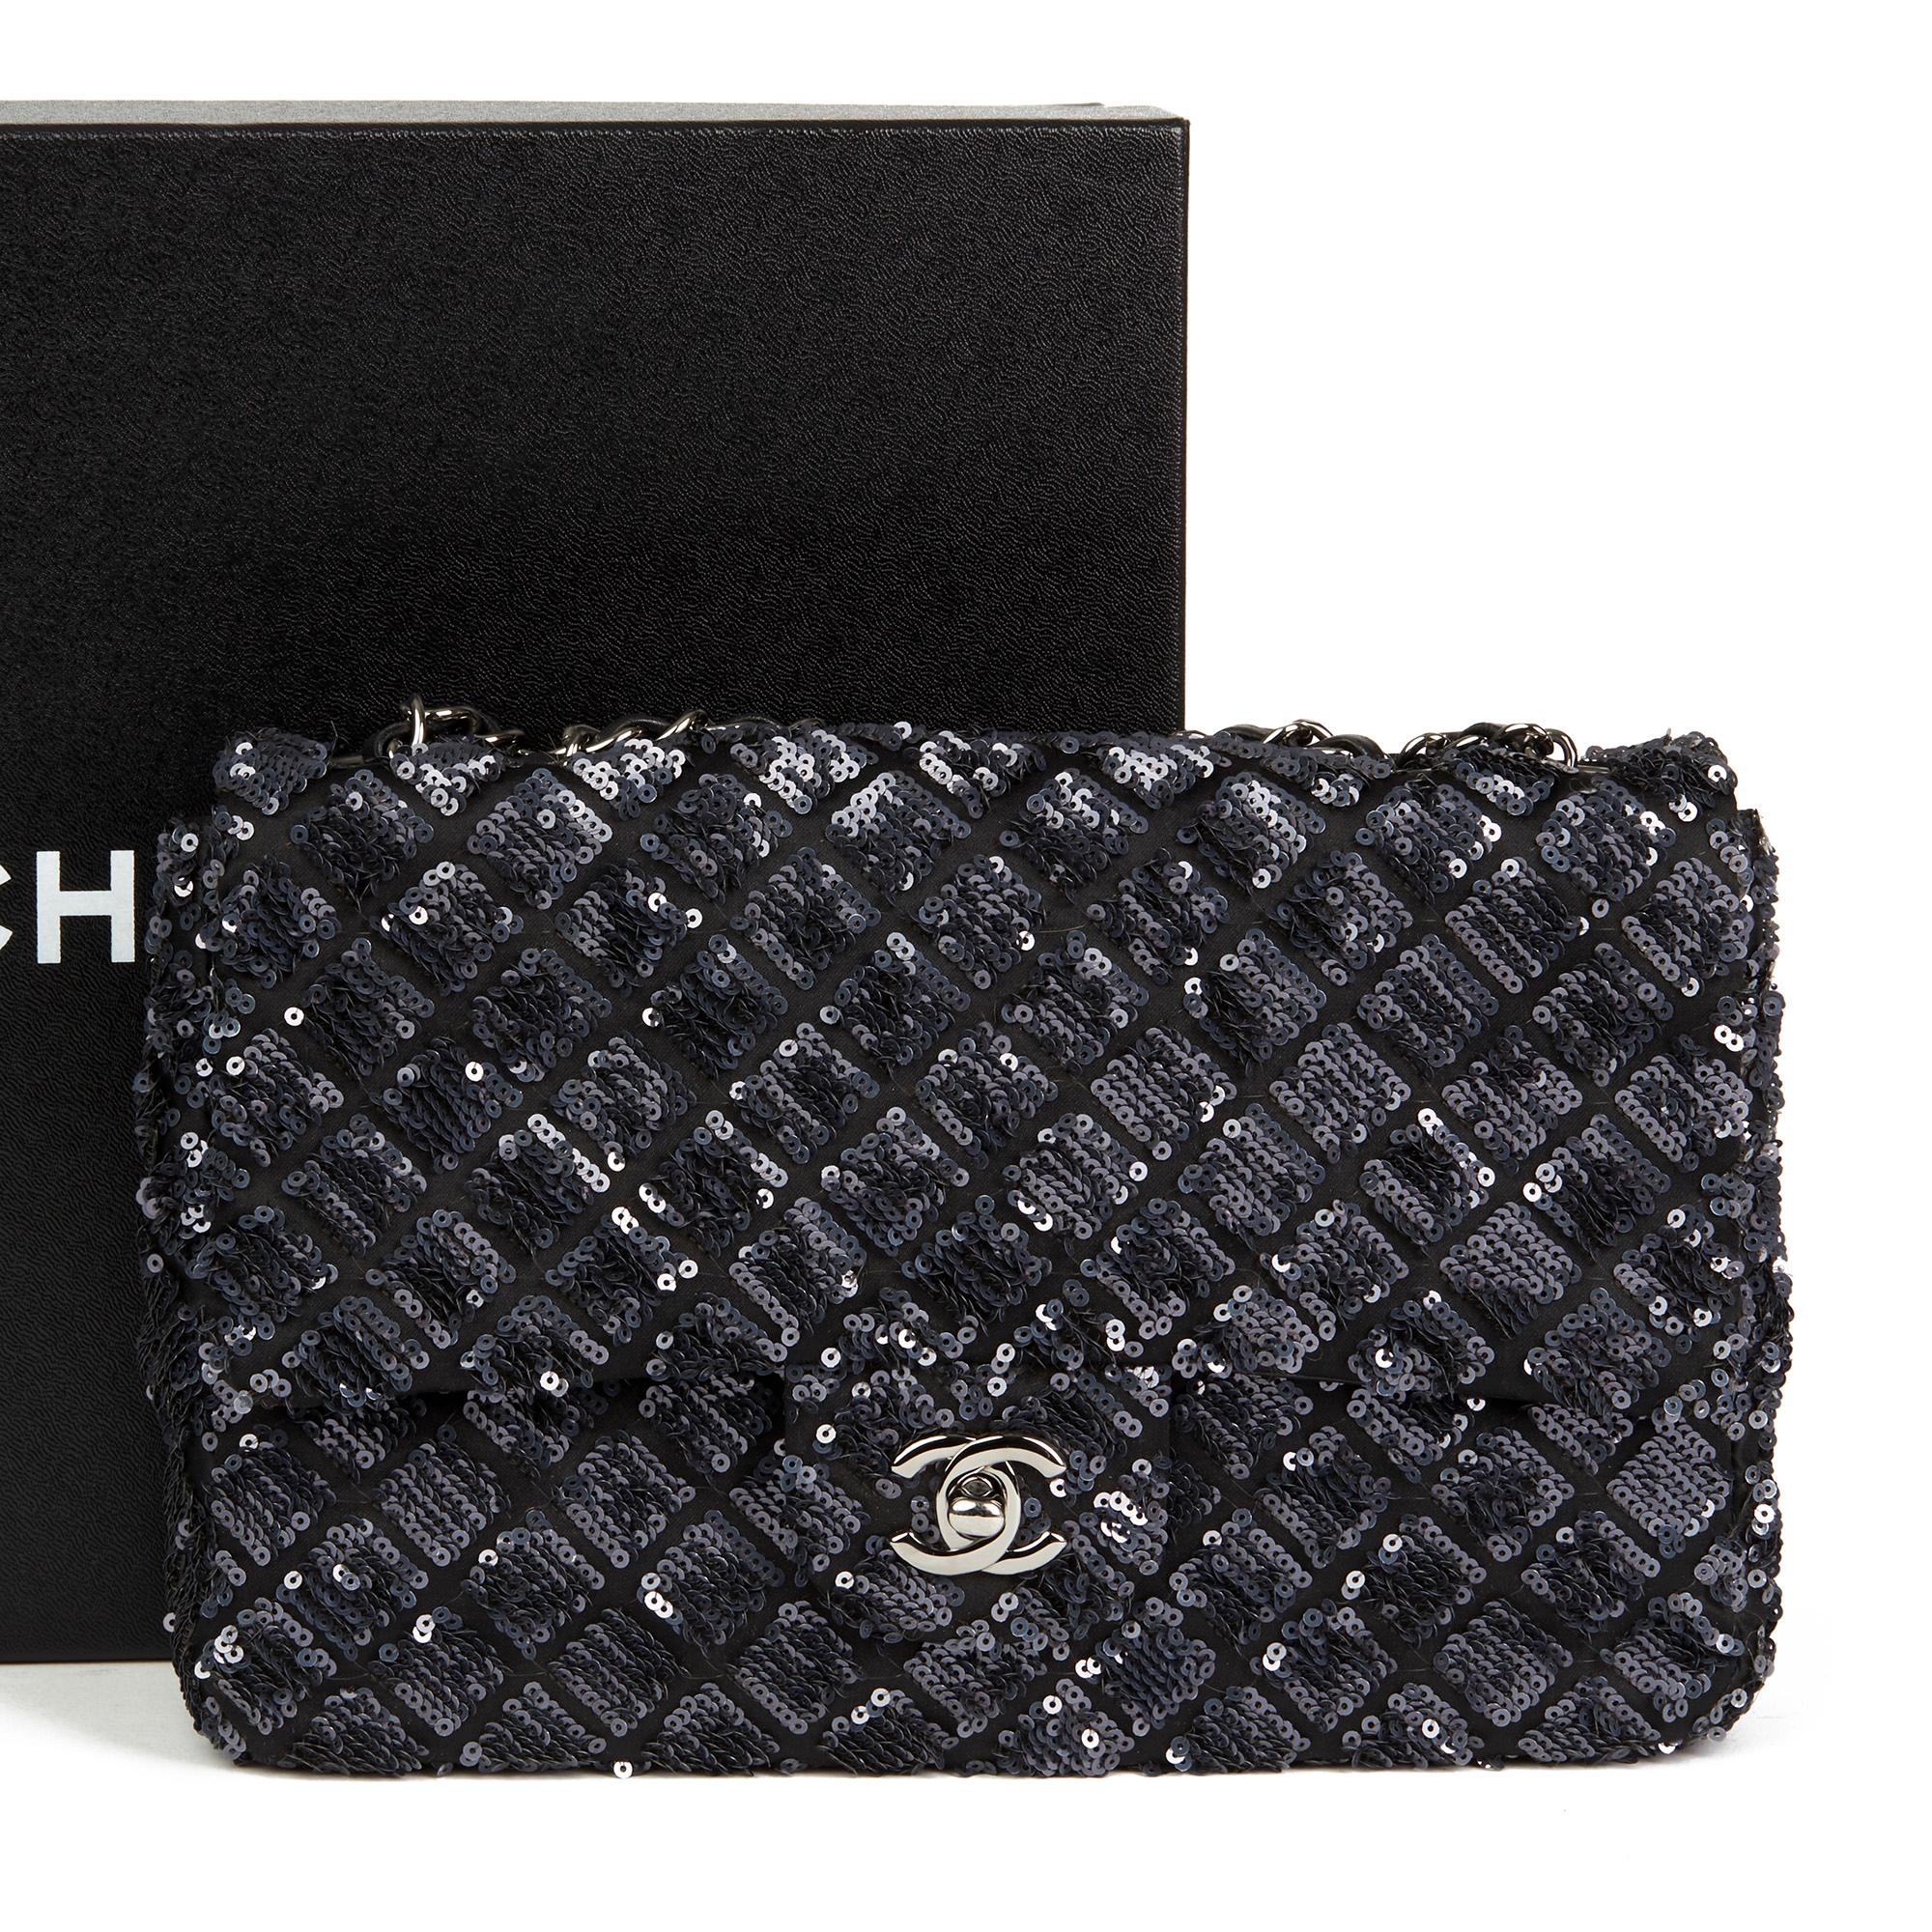 2013 Chanel Navy Sequin Embellished Classic Single Flap Bag 7